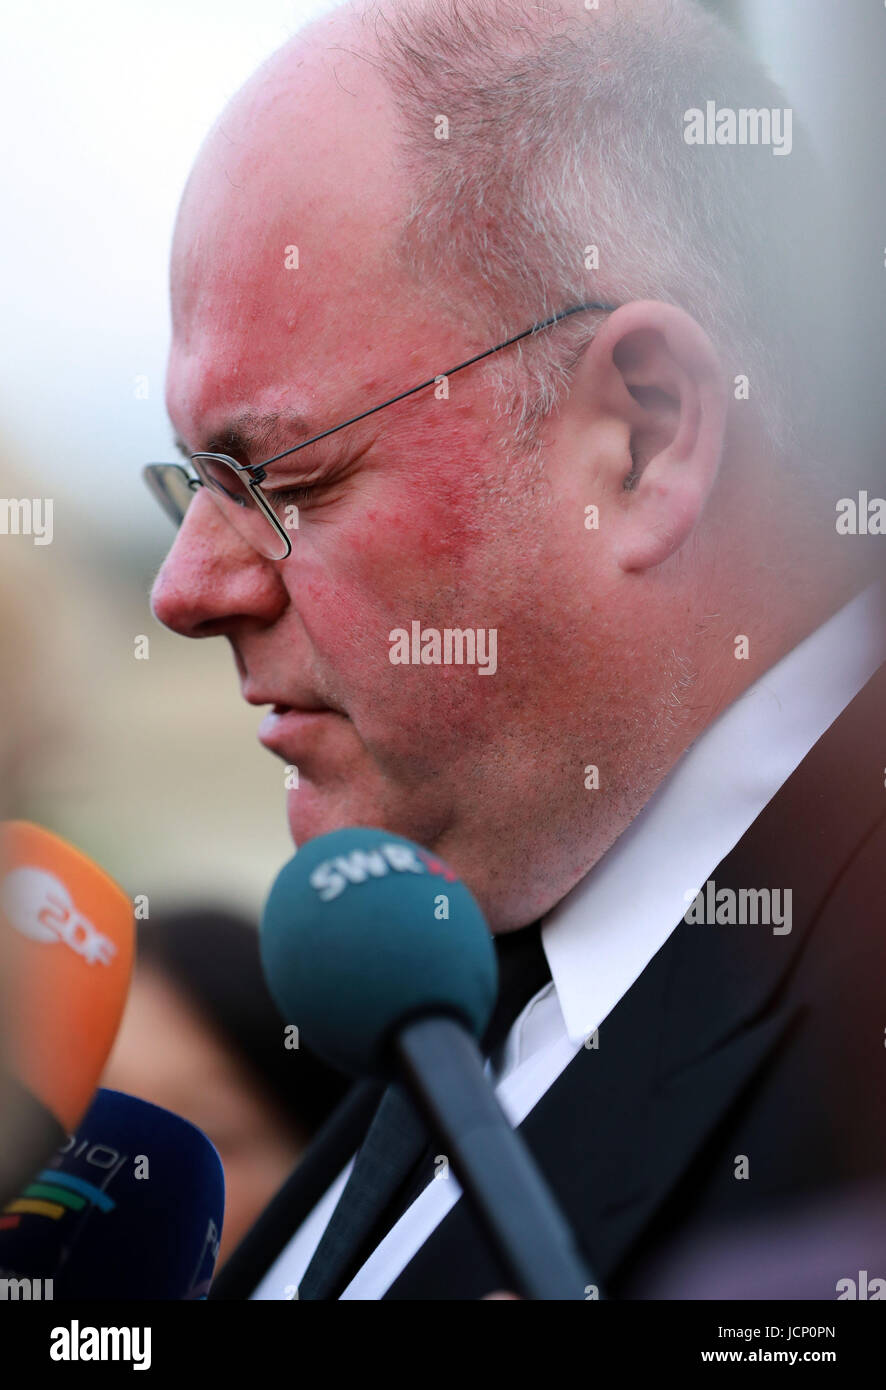 (170616) -- LUDWIGSHAFEN (GERMANY), June 16, 2017 (Xinhua) -- Walter Kohl, son of former German Chancellor Helmut Kohl, speaks to media outside his father's home in Ludwigshafen, Germany, on June 16, 2017. Former German Chancellor Helmut Kohl died at his home in Germany's Ludwigshafen on Friday at the age of 87. (Xinhua/Luo Huanhuan) Stock Photo